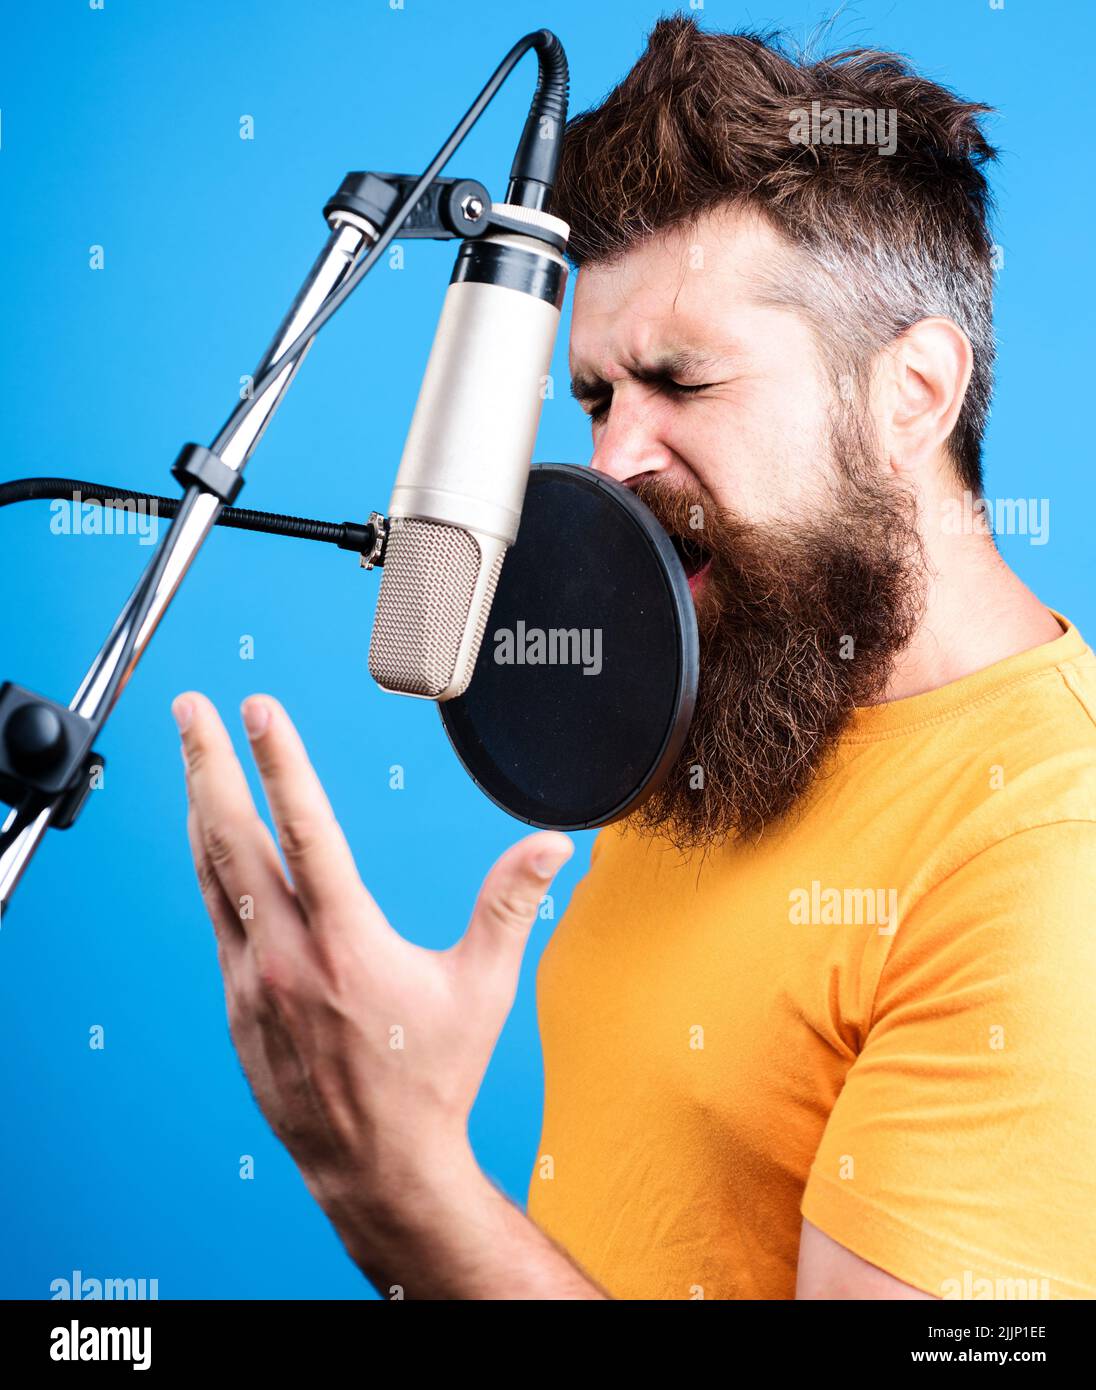 Male singer singing in condenser microphone. Professional vocalist in studio. Music, leisure concept. Stock Photo